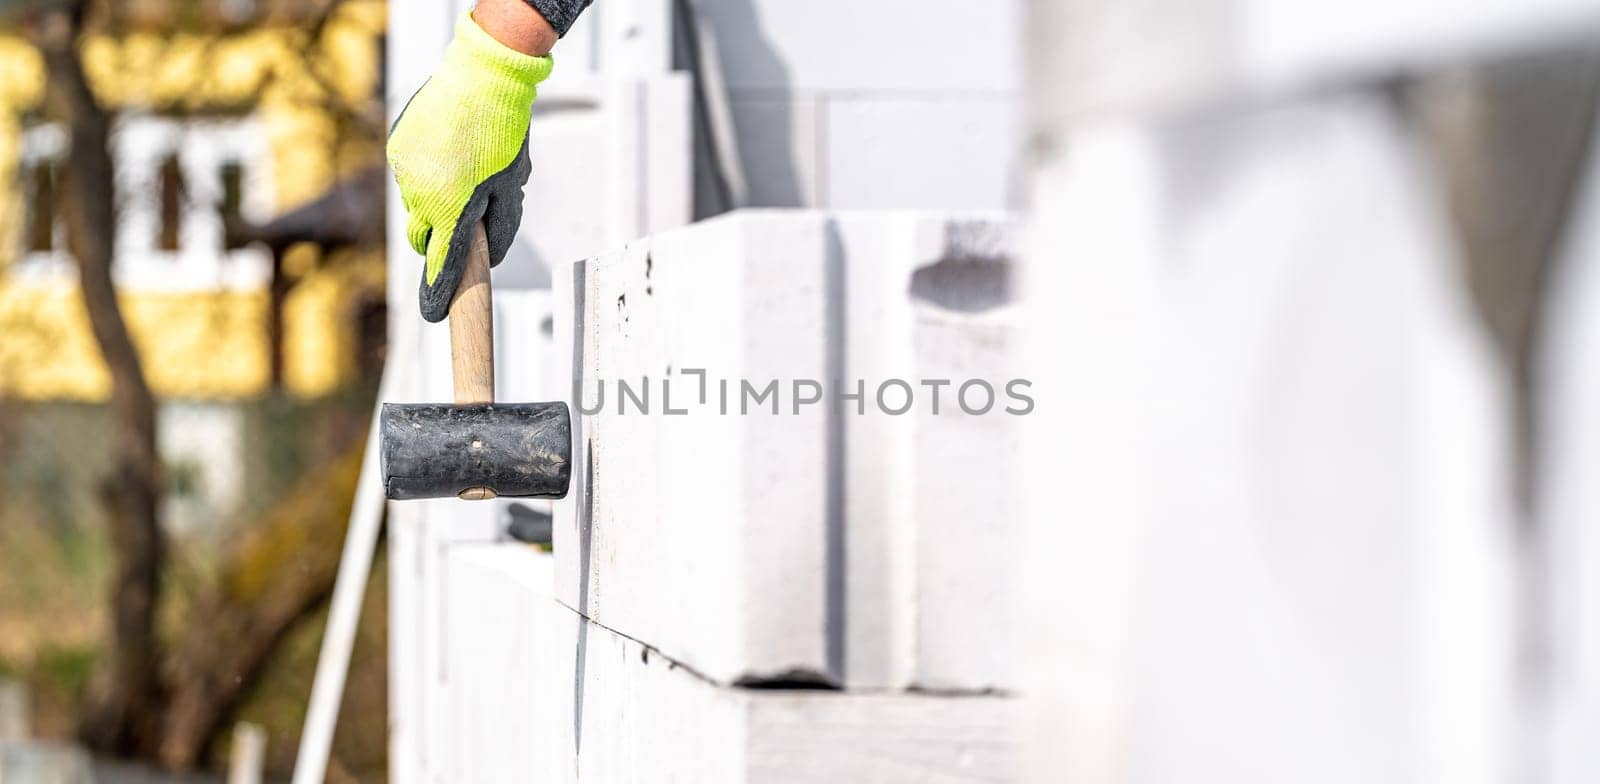 leveling walls with a rubber hammer when building a house by Edophoto